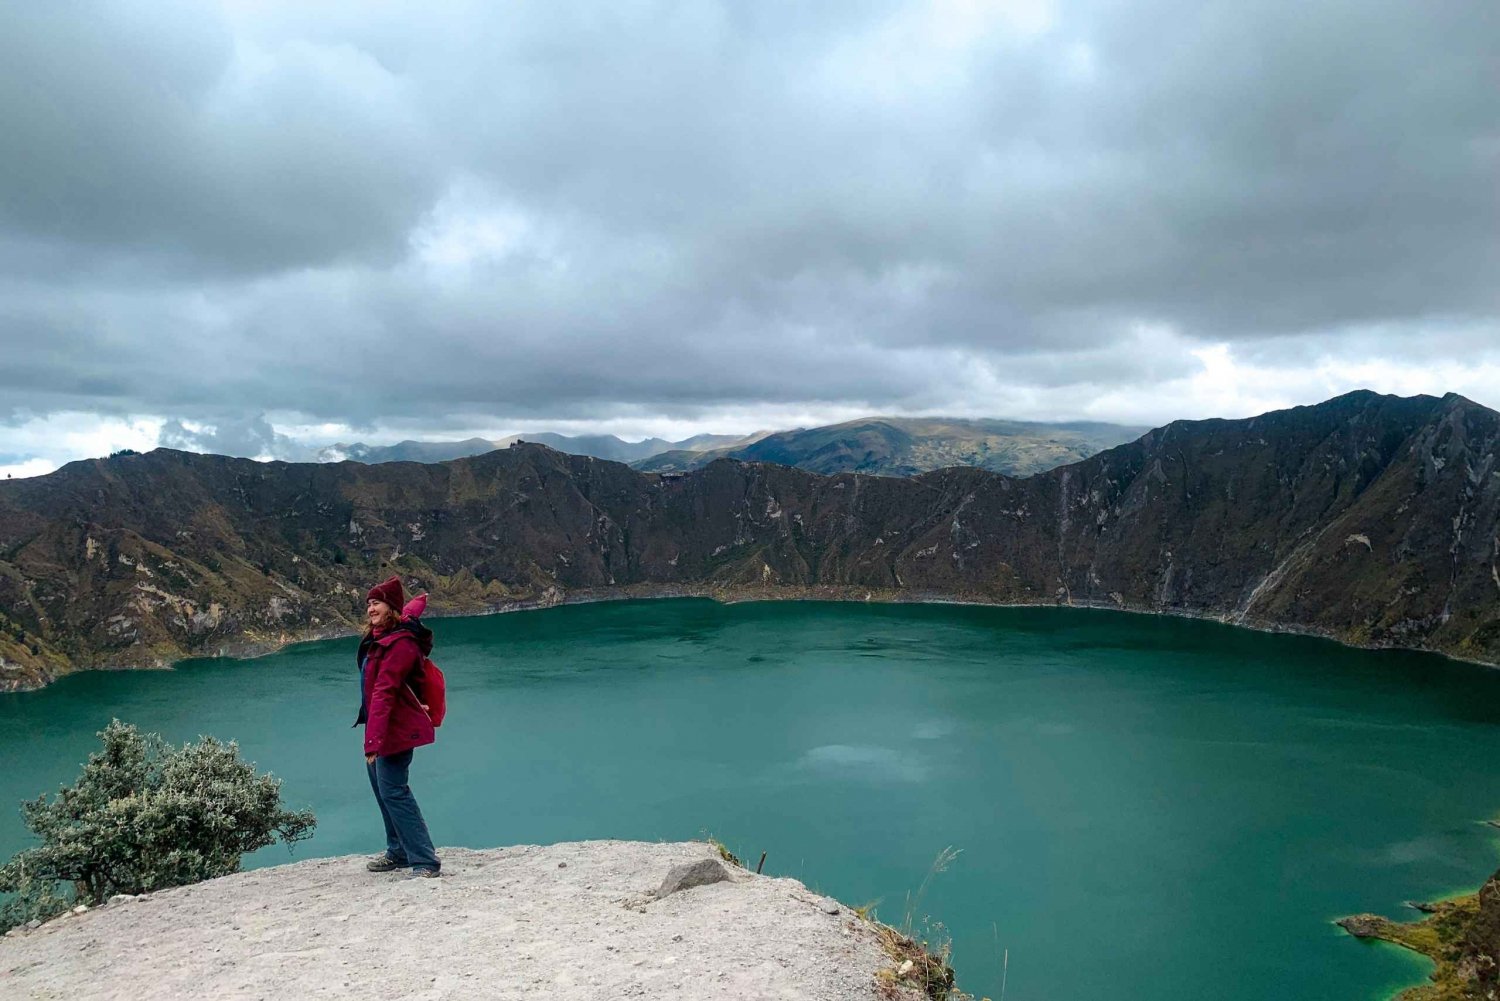 From Quito: Day trip to Quilotoa and Baños with tickets